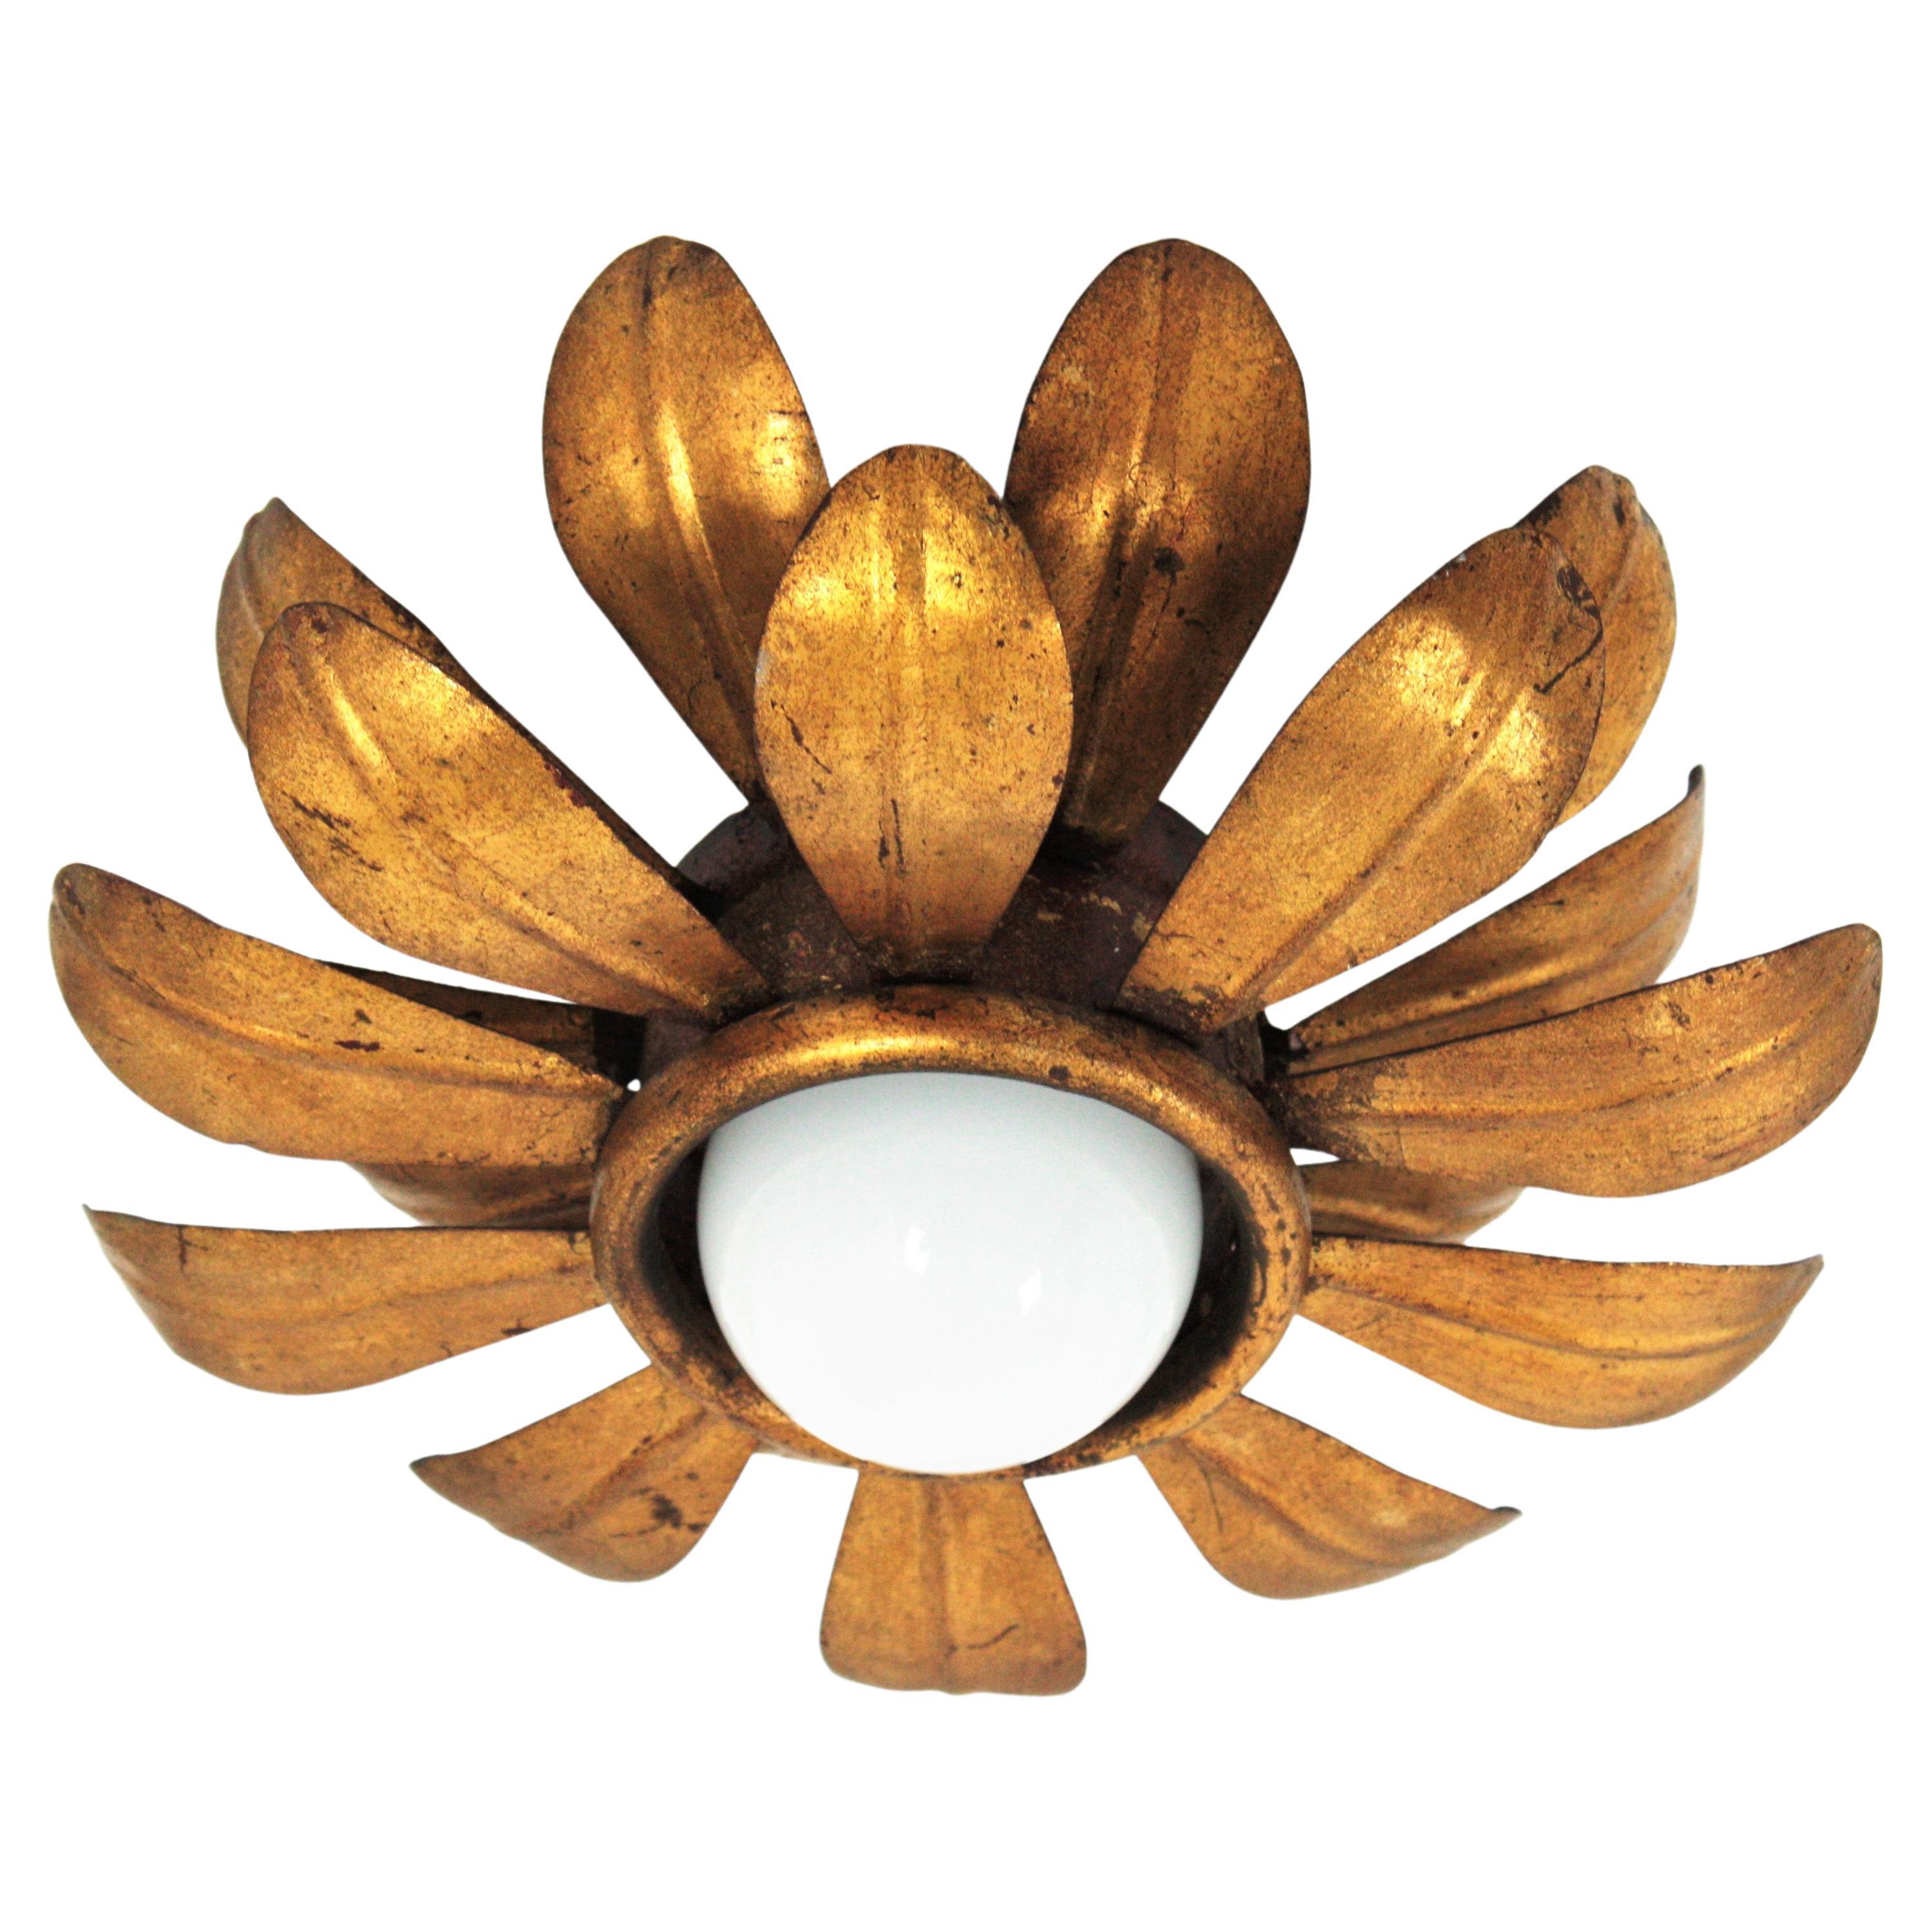 Sunburst Flower Flush Mount / Pendant, Iron, Gold Leaf, France, 1950s
Hollywood Regency double layered sunburst floral flush mount or light fixture. This ceiling sconce was finely executed, all made by hand and gilded with gold leaf.
It has a